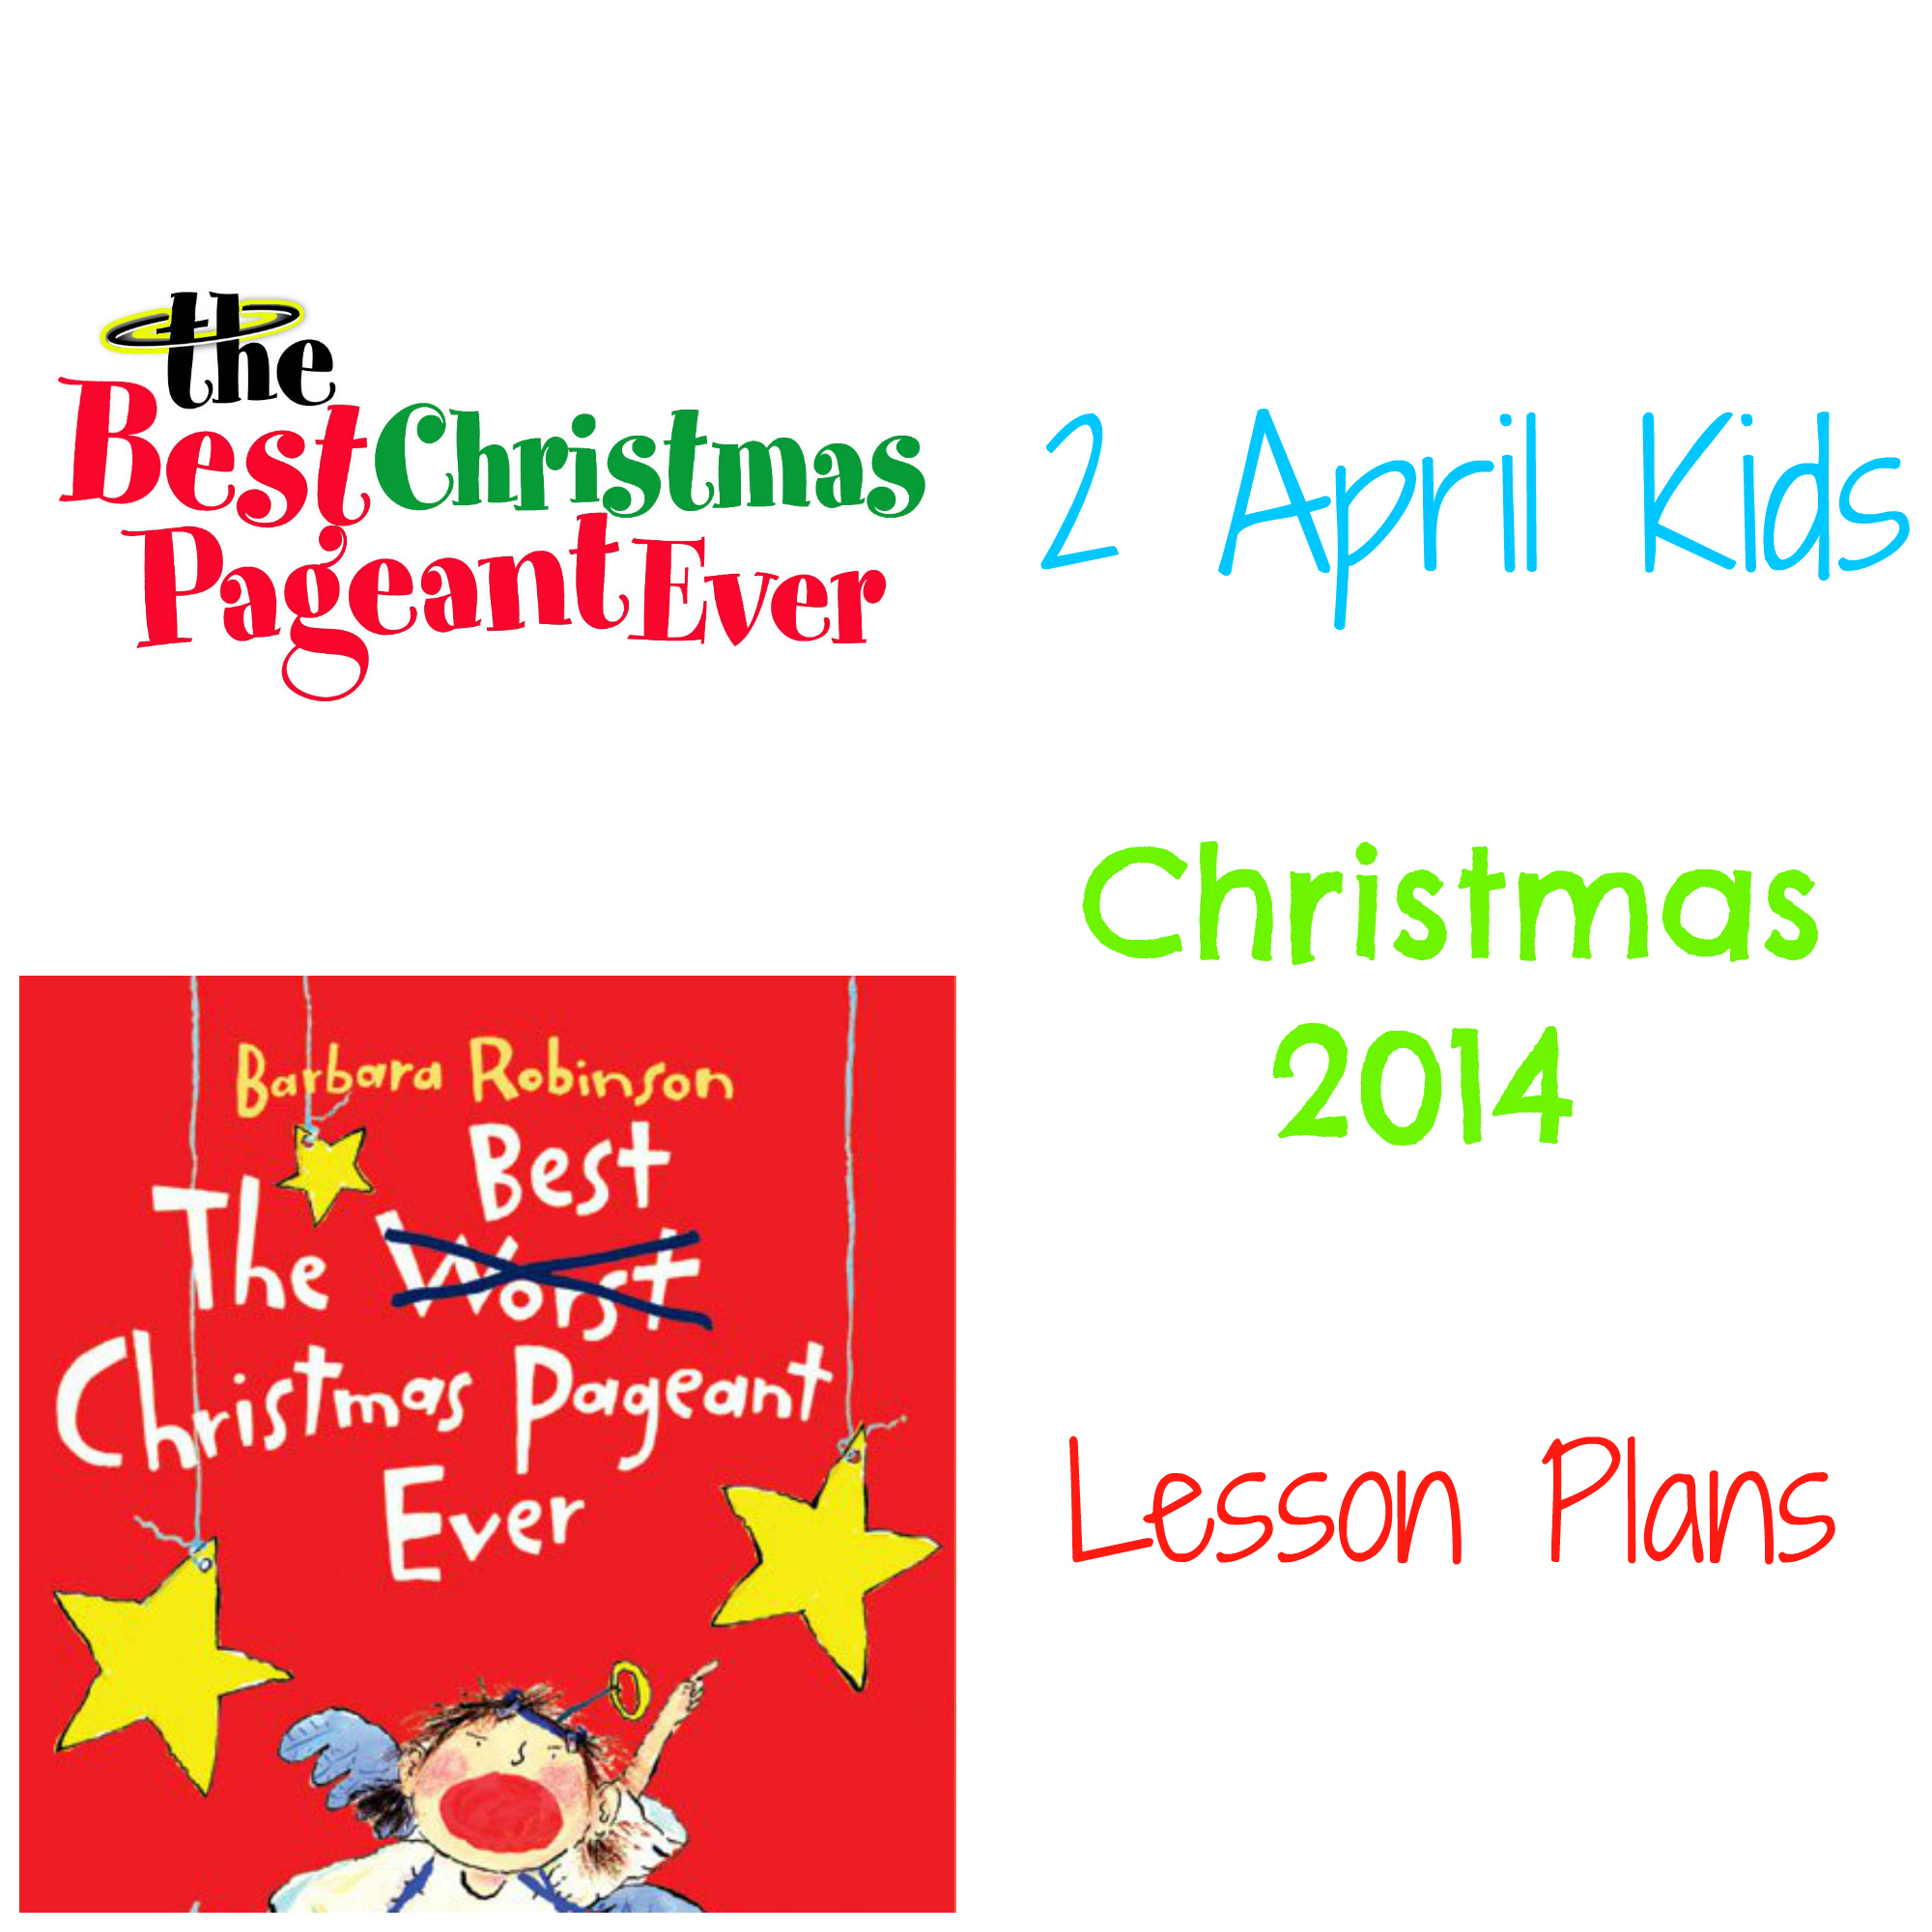 Our Homeschool Christmas Unit 2014 – The Best Christmas